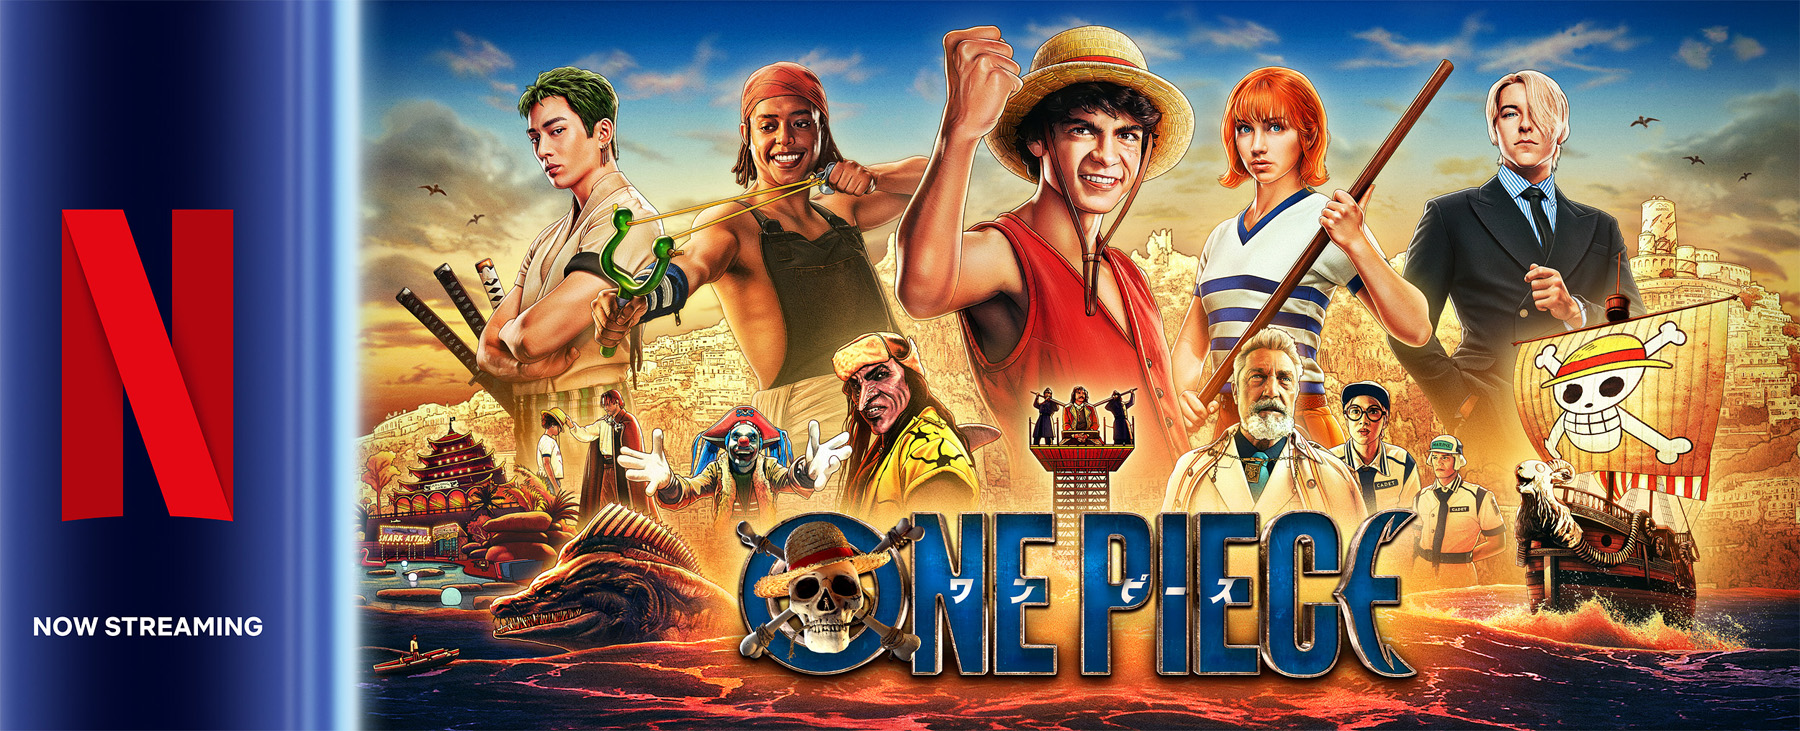 One Piece Live Action Poster